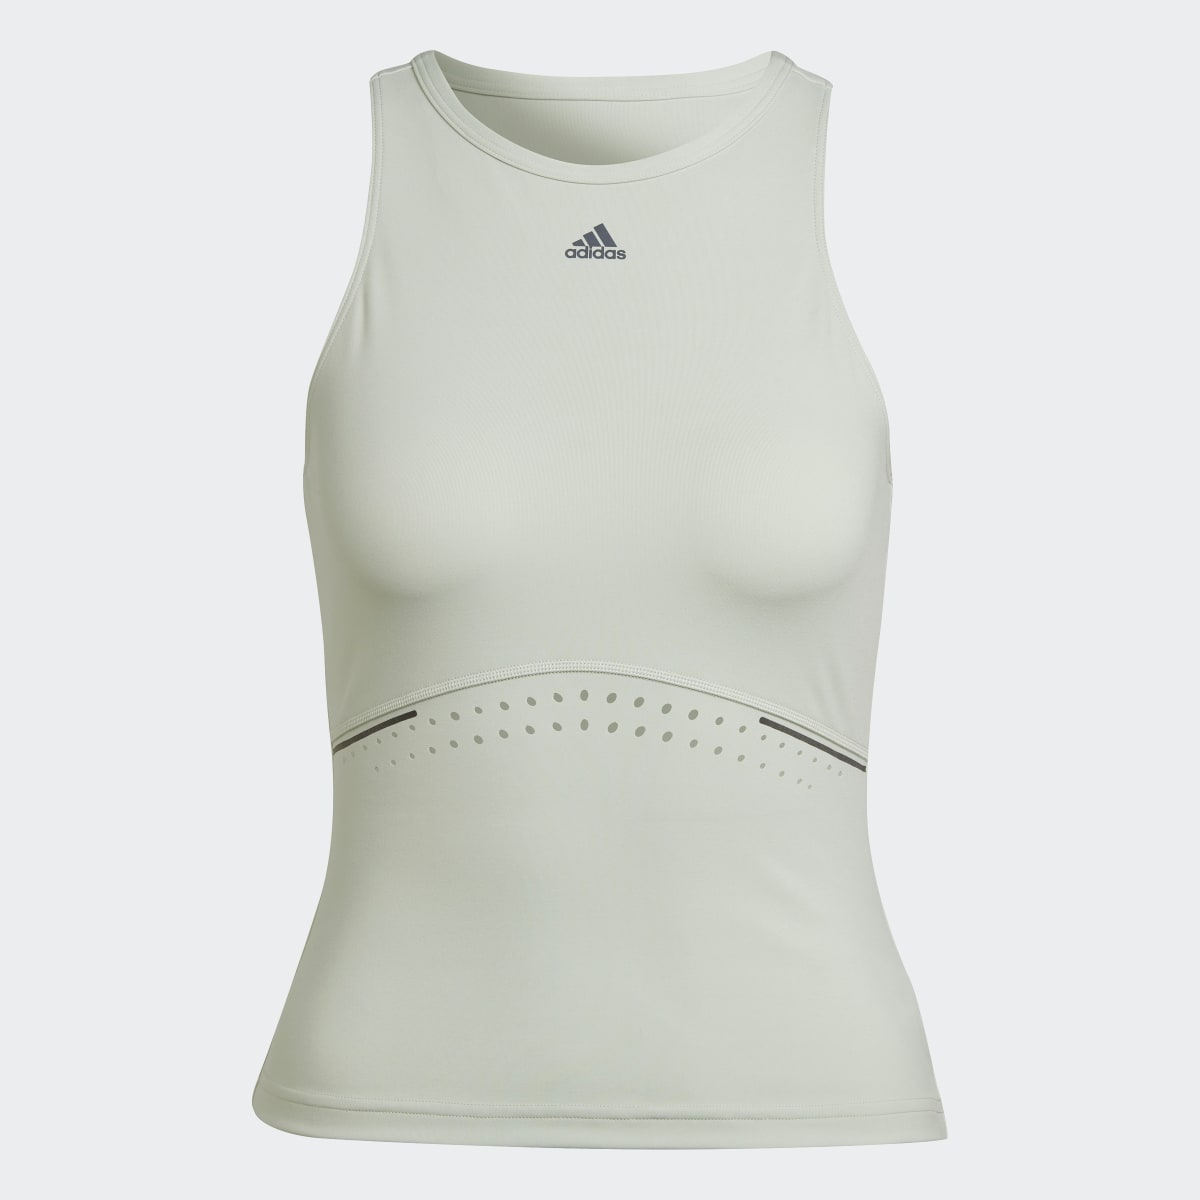 Adidas Camiseta sin mangas HIIT 45 Seconds Fitted. 5